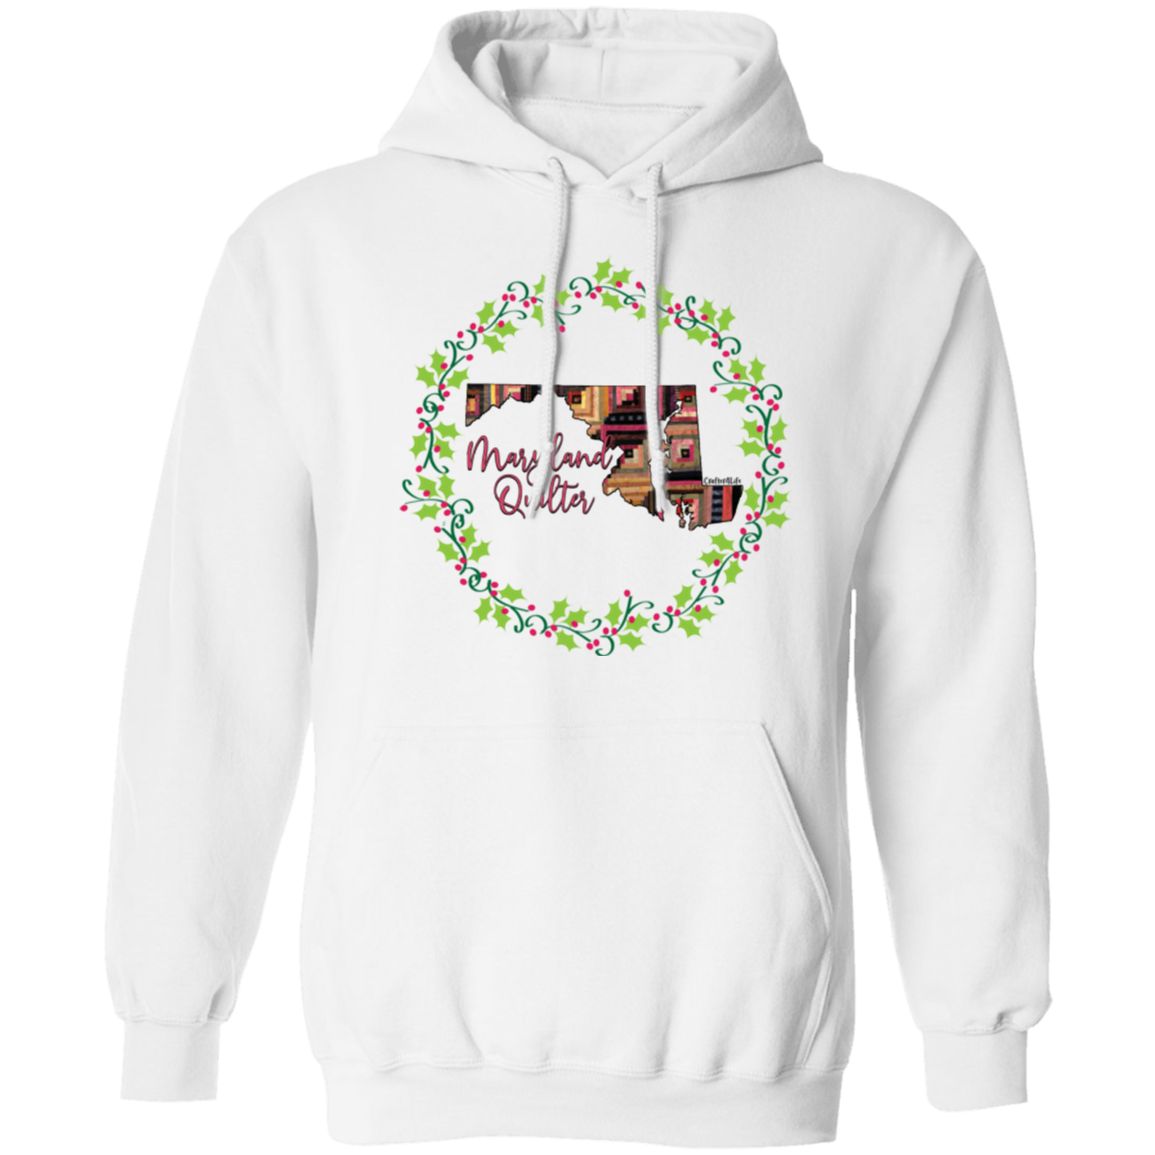 Maryland Quilter Christmas Pullover Hoodie